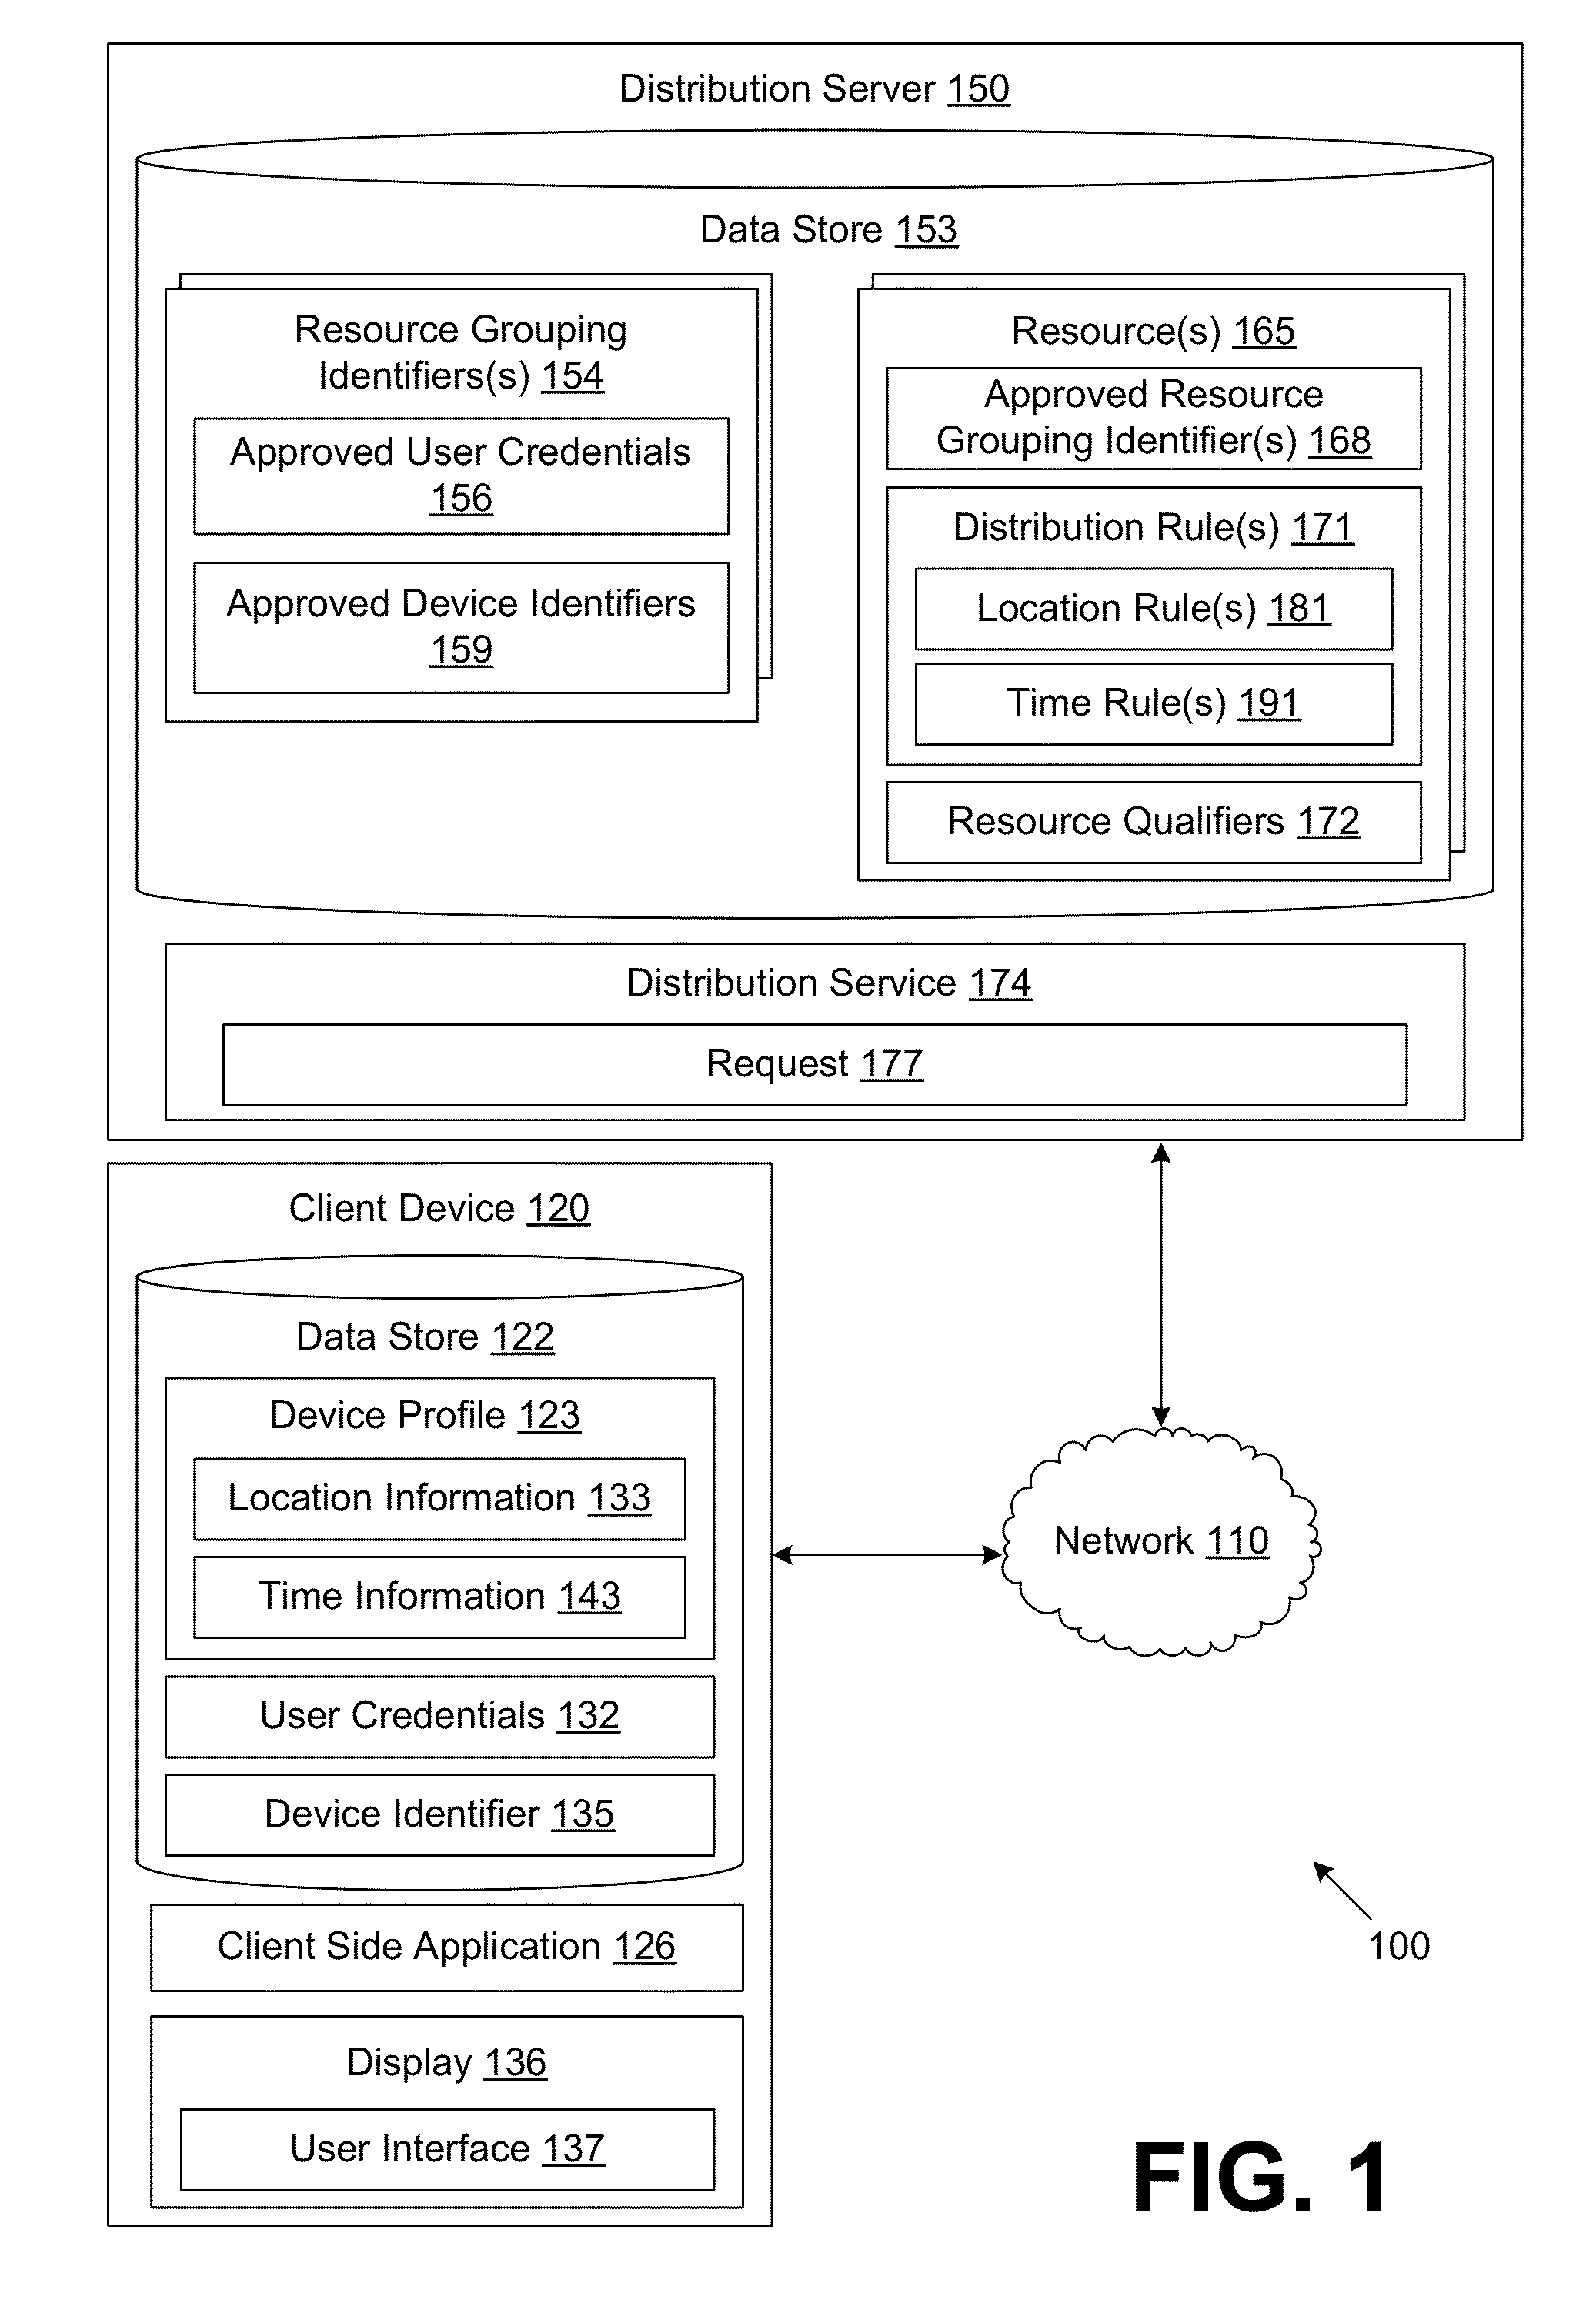 Controlling Distribution of Resources on a Network